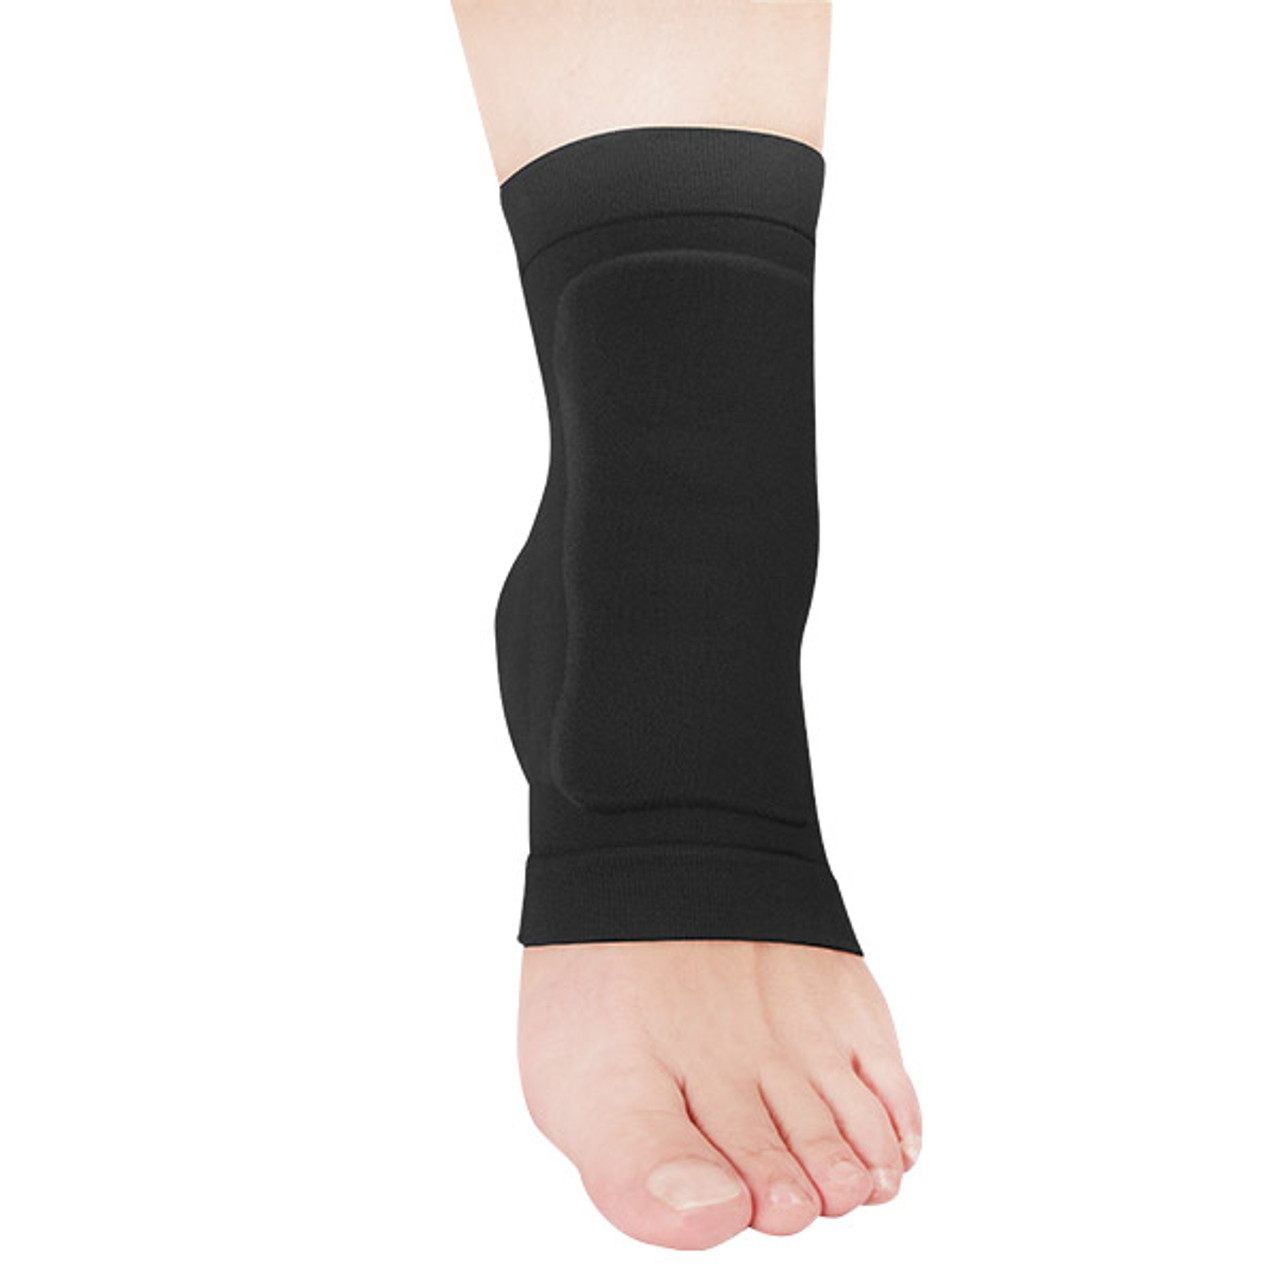 OrthoActive 2620 Forefoot Lace Protector